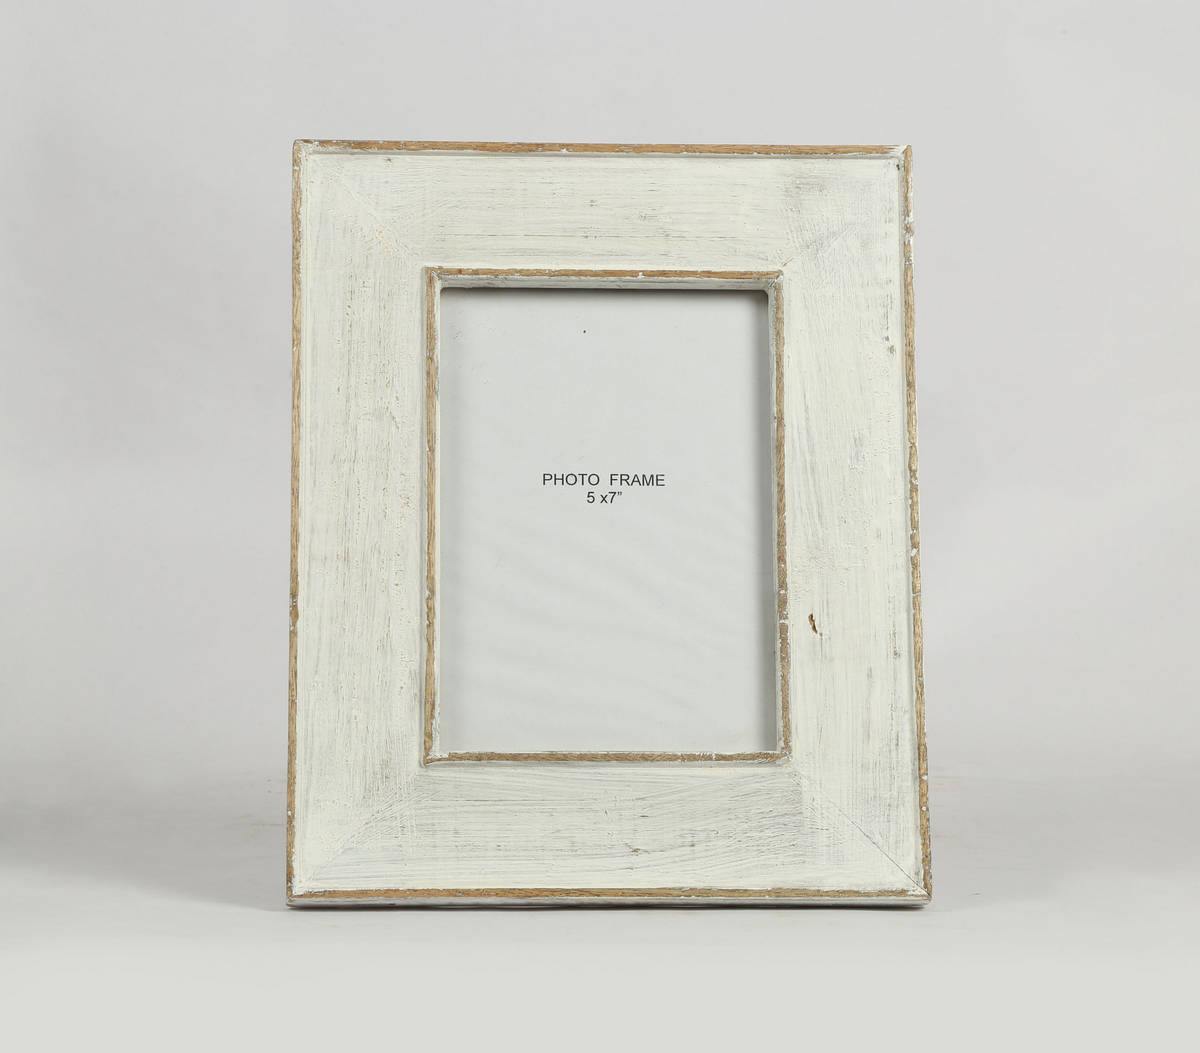 Hand cut recycled wood tabletop photo frame